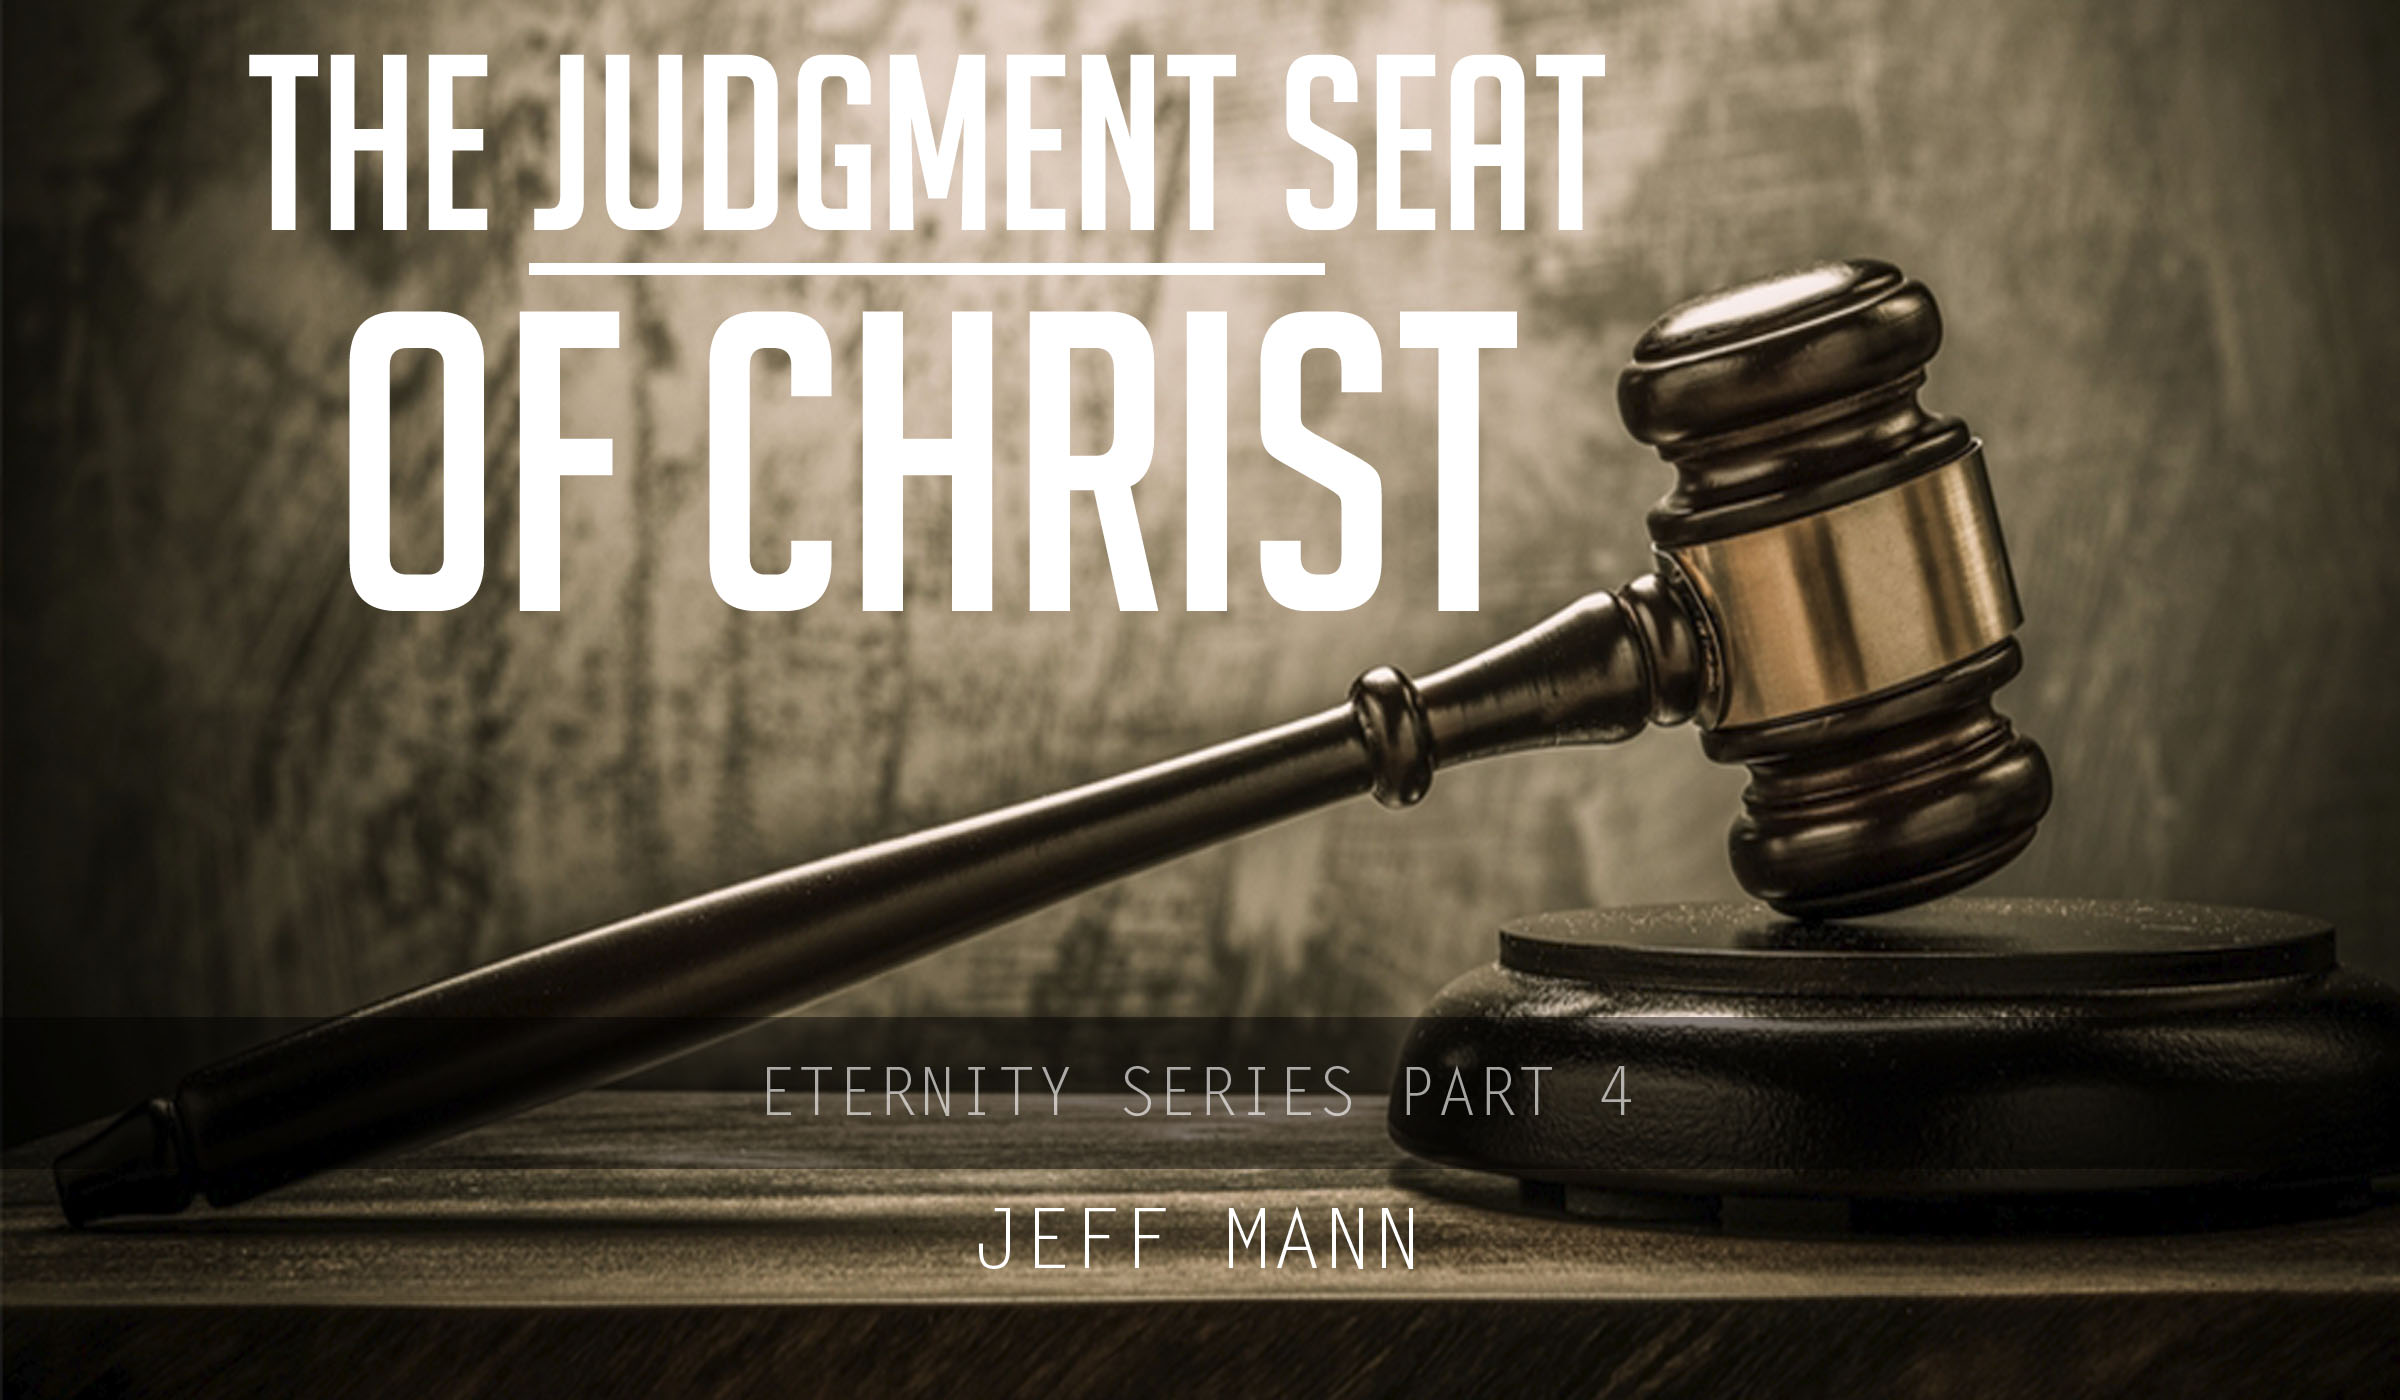 The Judgment Seat of Christ – Eternity Series Part 4